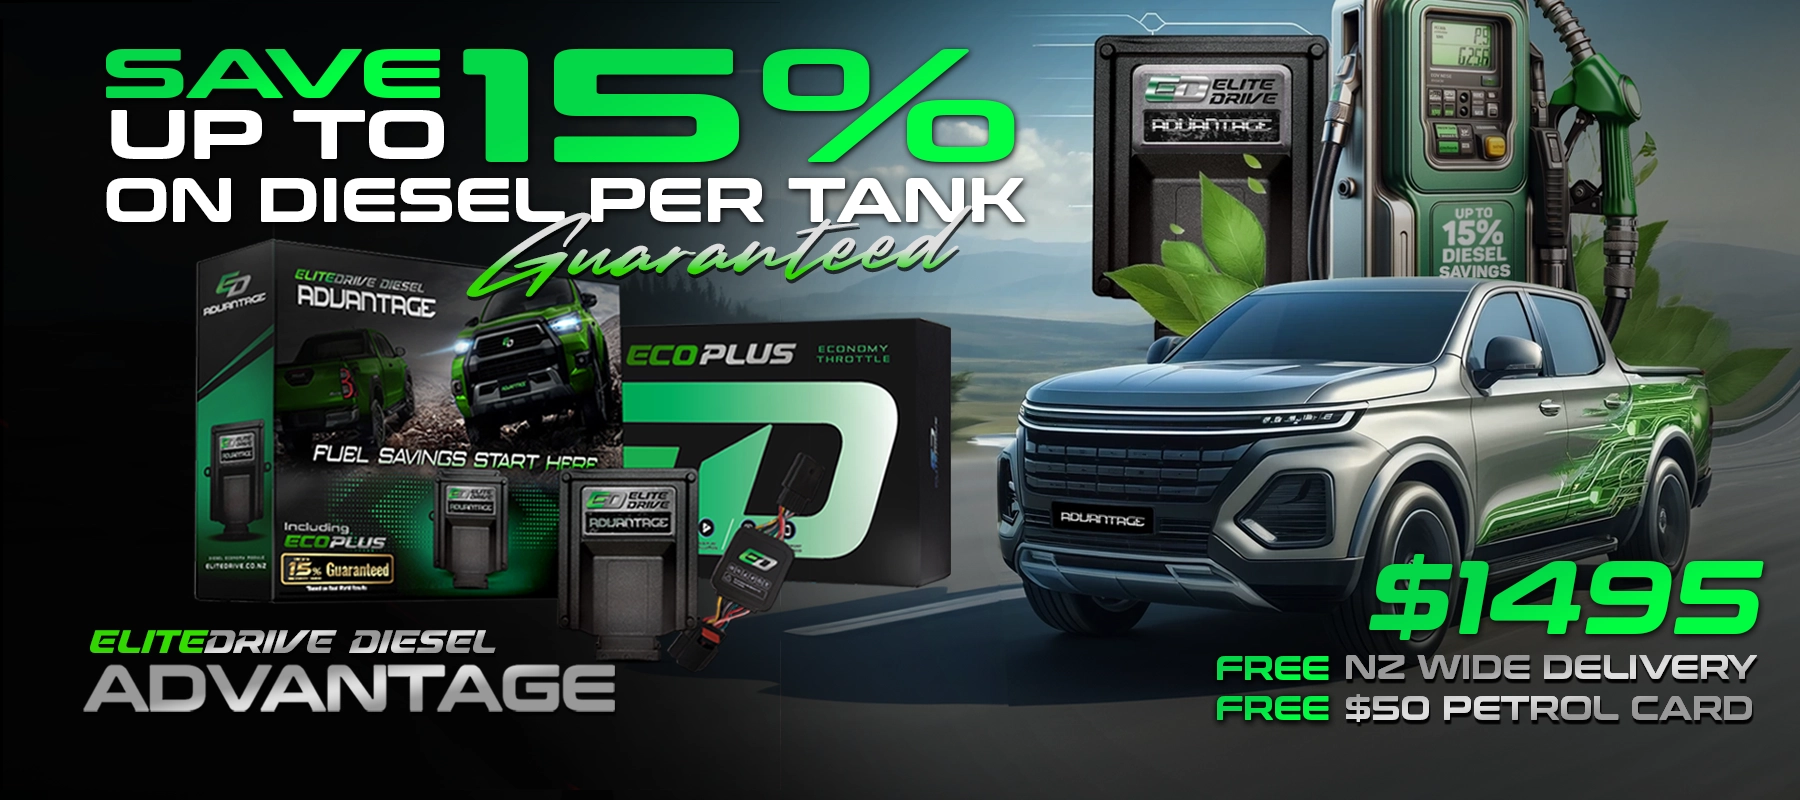 Save up to 15% on Diesel with Elitedrive Advantage & Eco-Plus